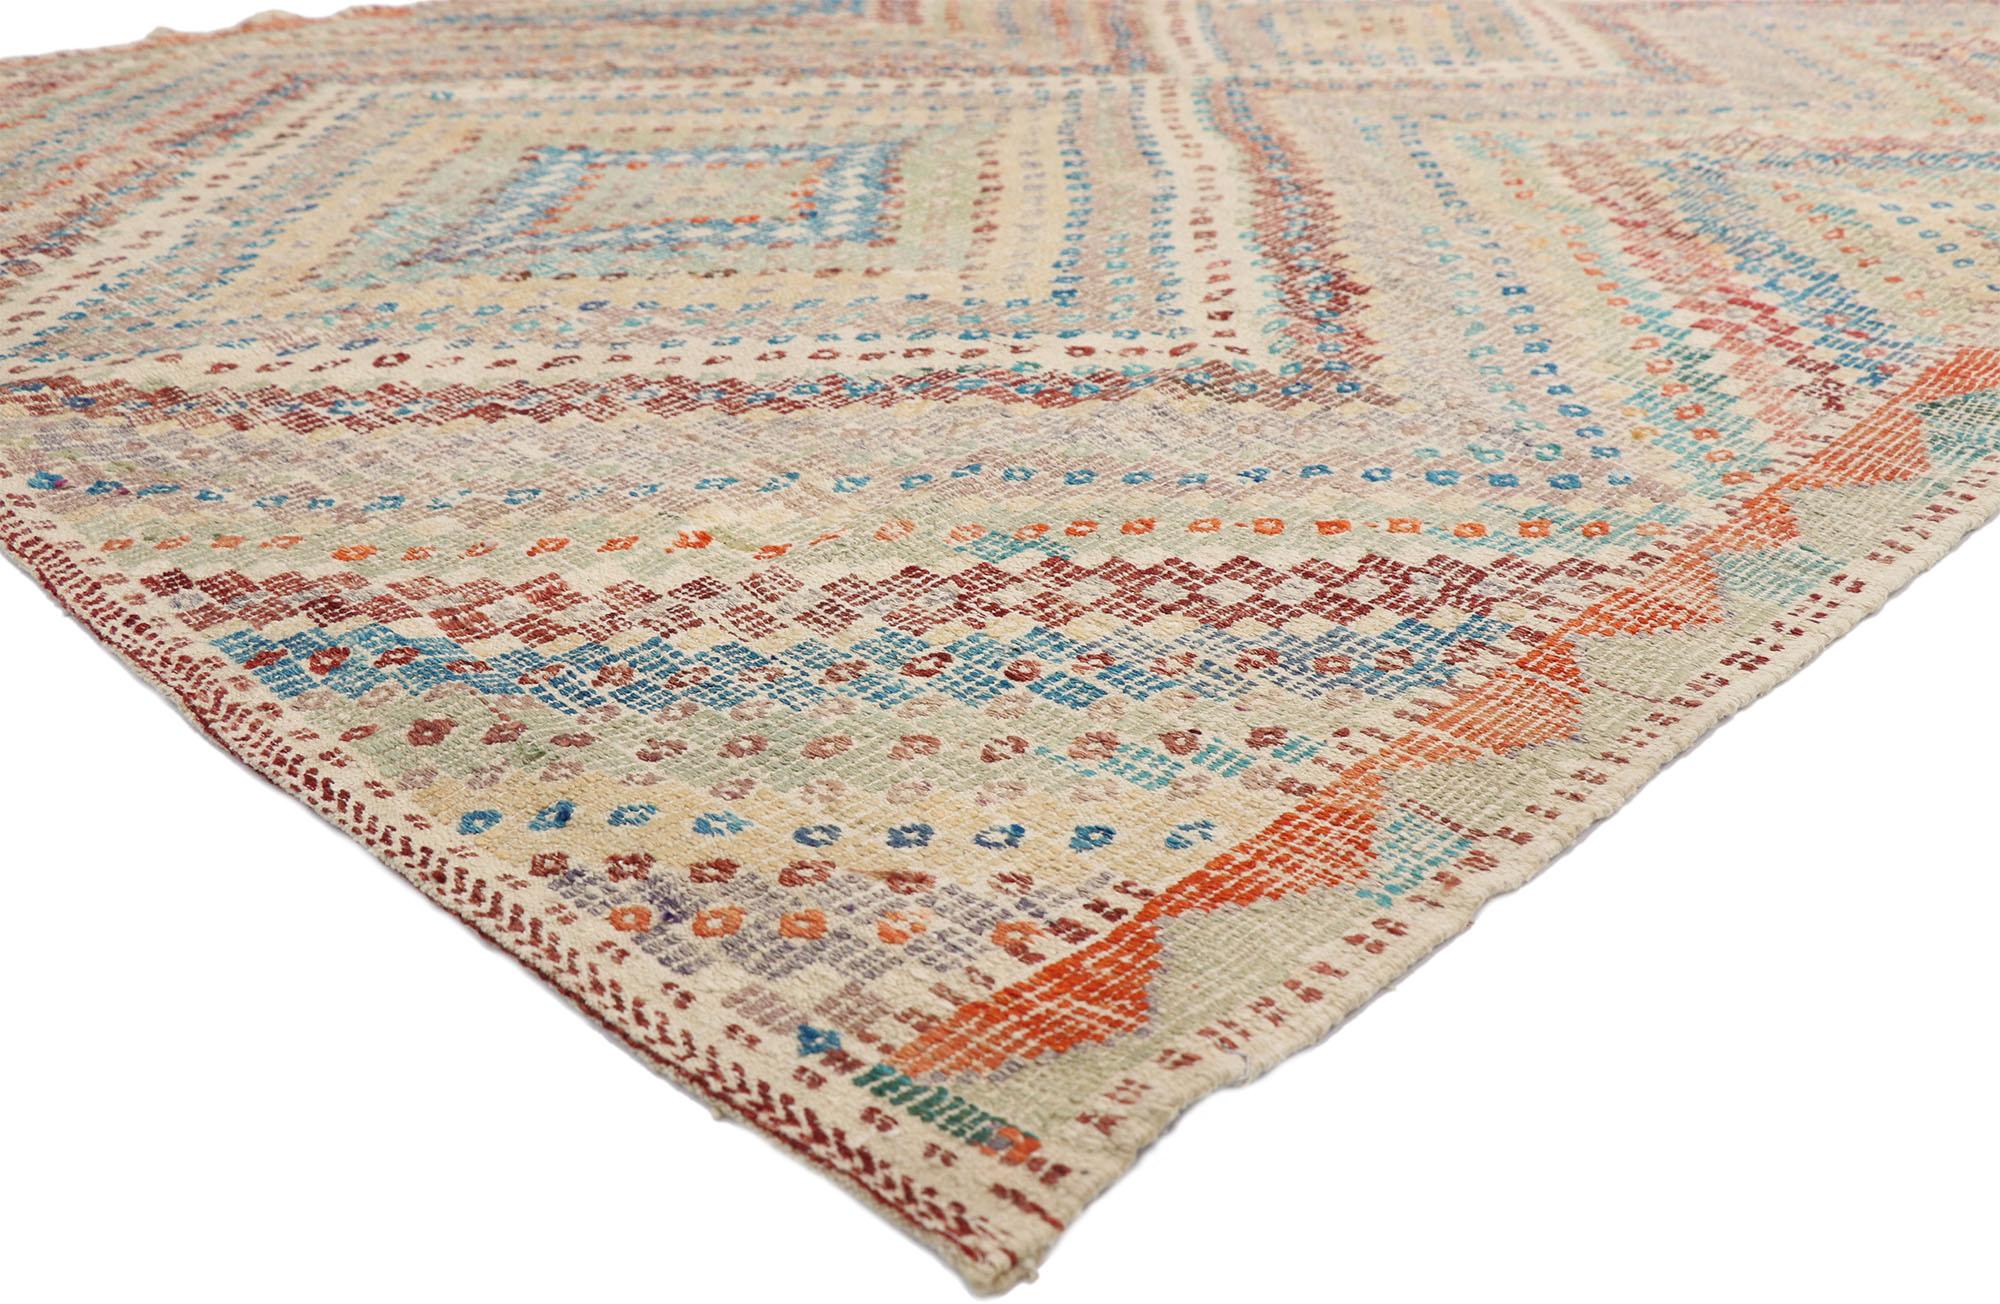 52556, distressed vintage Turkish Kilim rug with Southern Living British Colonial style. This handwoven wool vintage Turkish Kilim rug features a central diamond surrounded by additional striped bands creating an expansion effect for the main